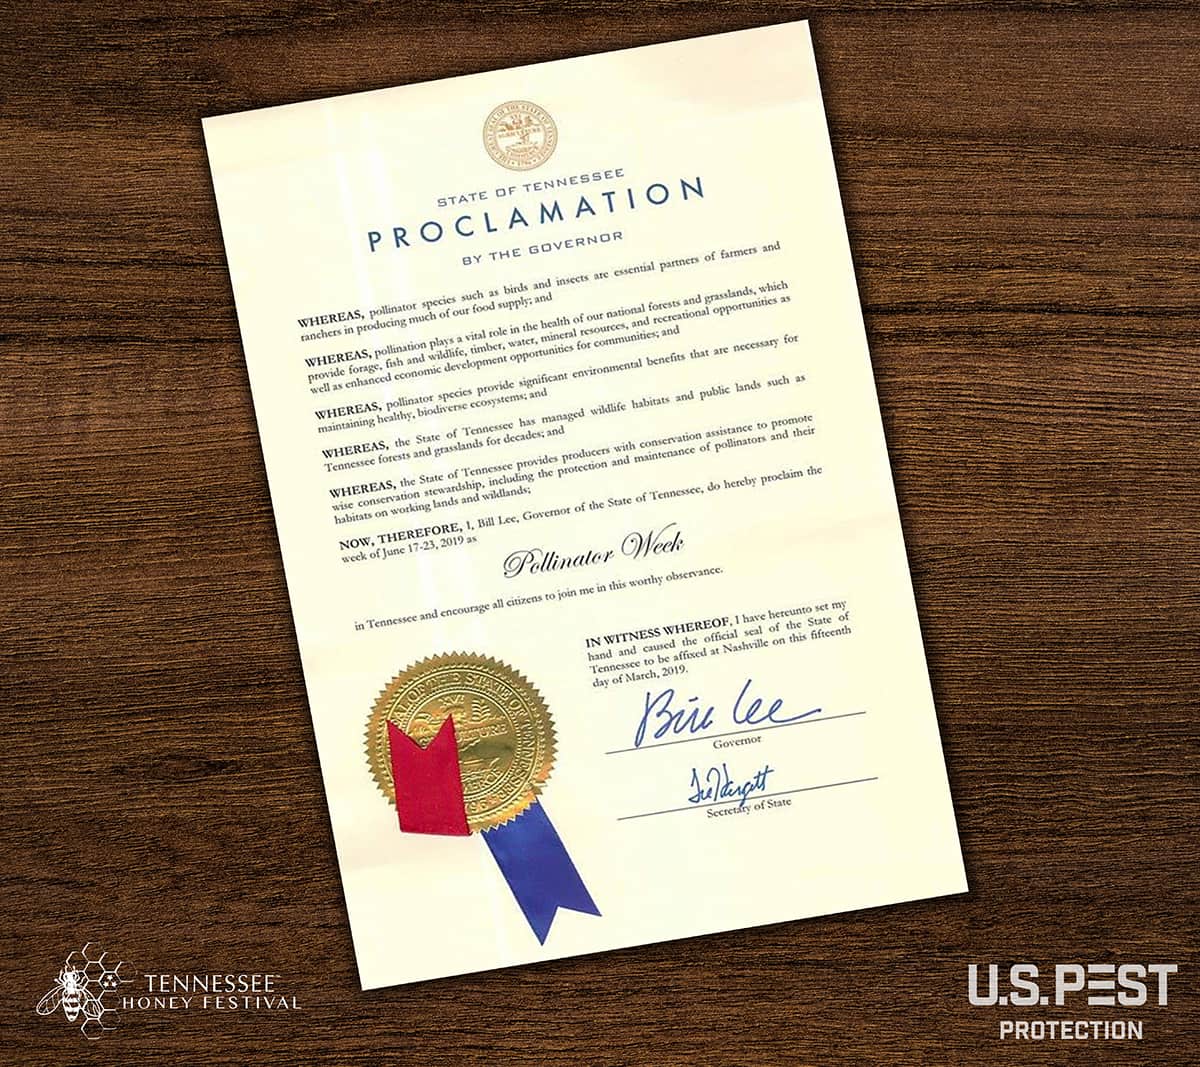 Pollinator Week Proclamation In Tennessee